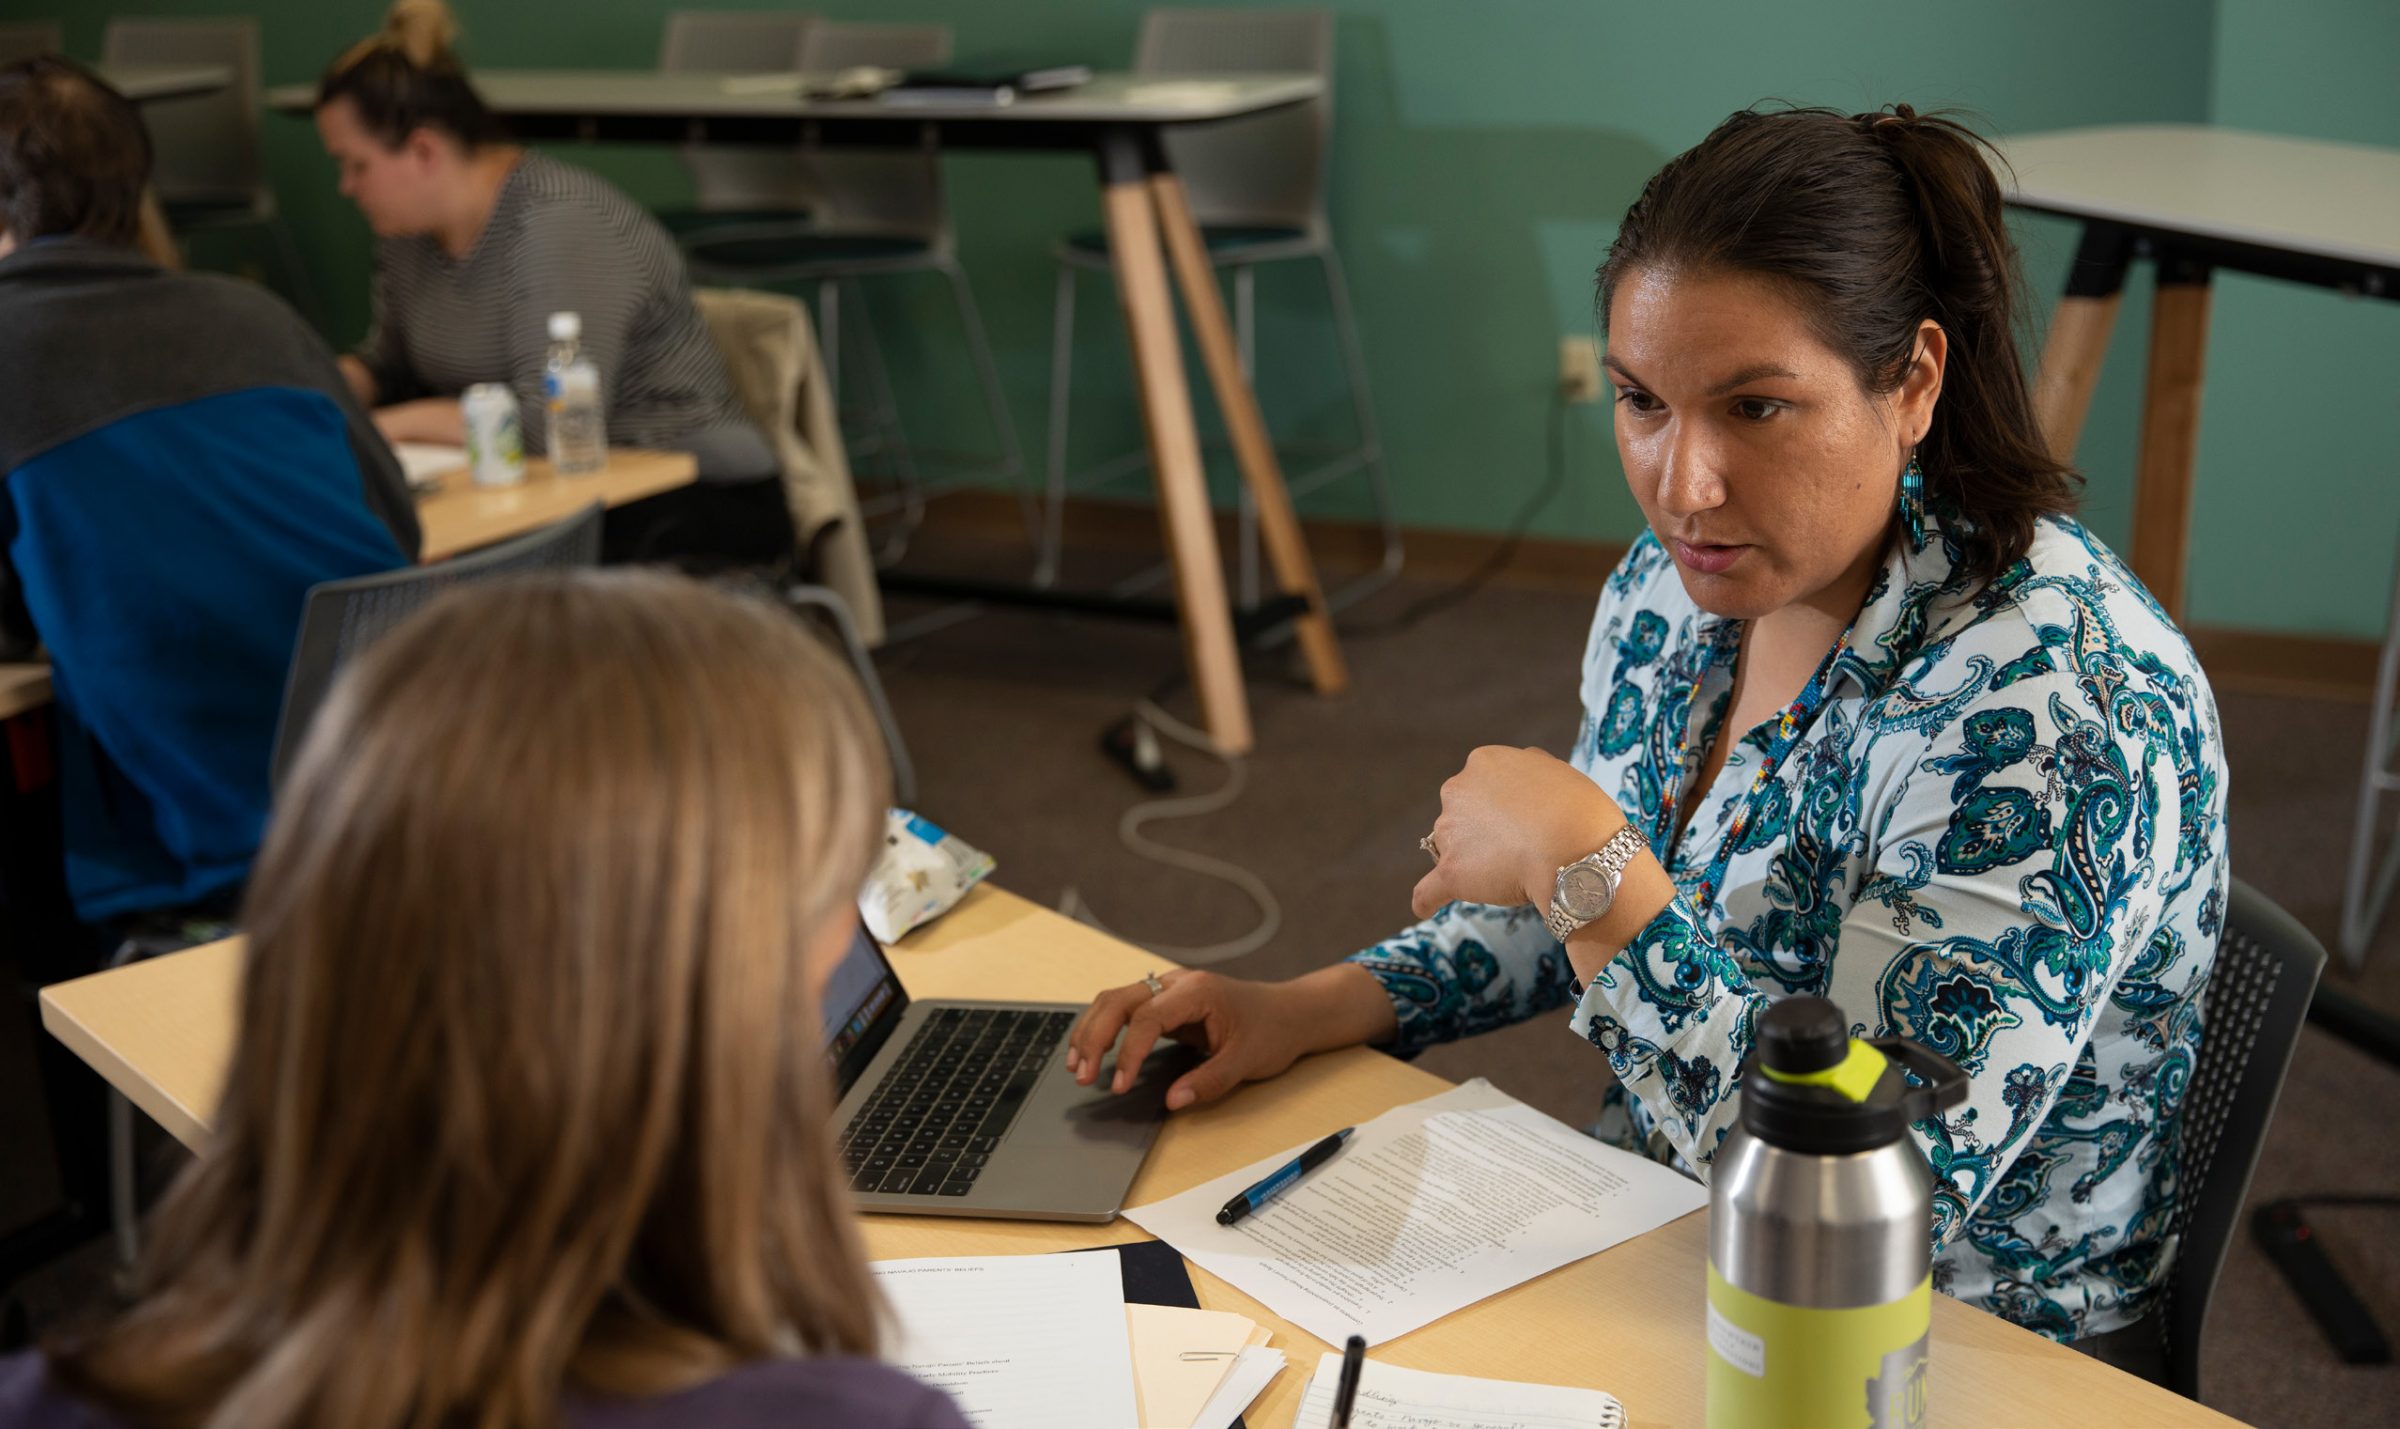 An NAU professor teaches a student manuscript writing. They are both sitting at a table, and the professor is in front of a laptop. She has dark hair pulled into a ponytail and is wearing turquoise earrings and a white button-down shirt with turquoise paisley print. The student has their back to the camera, but has straight, light brown hair.